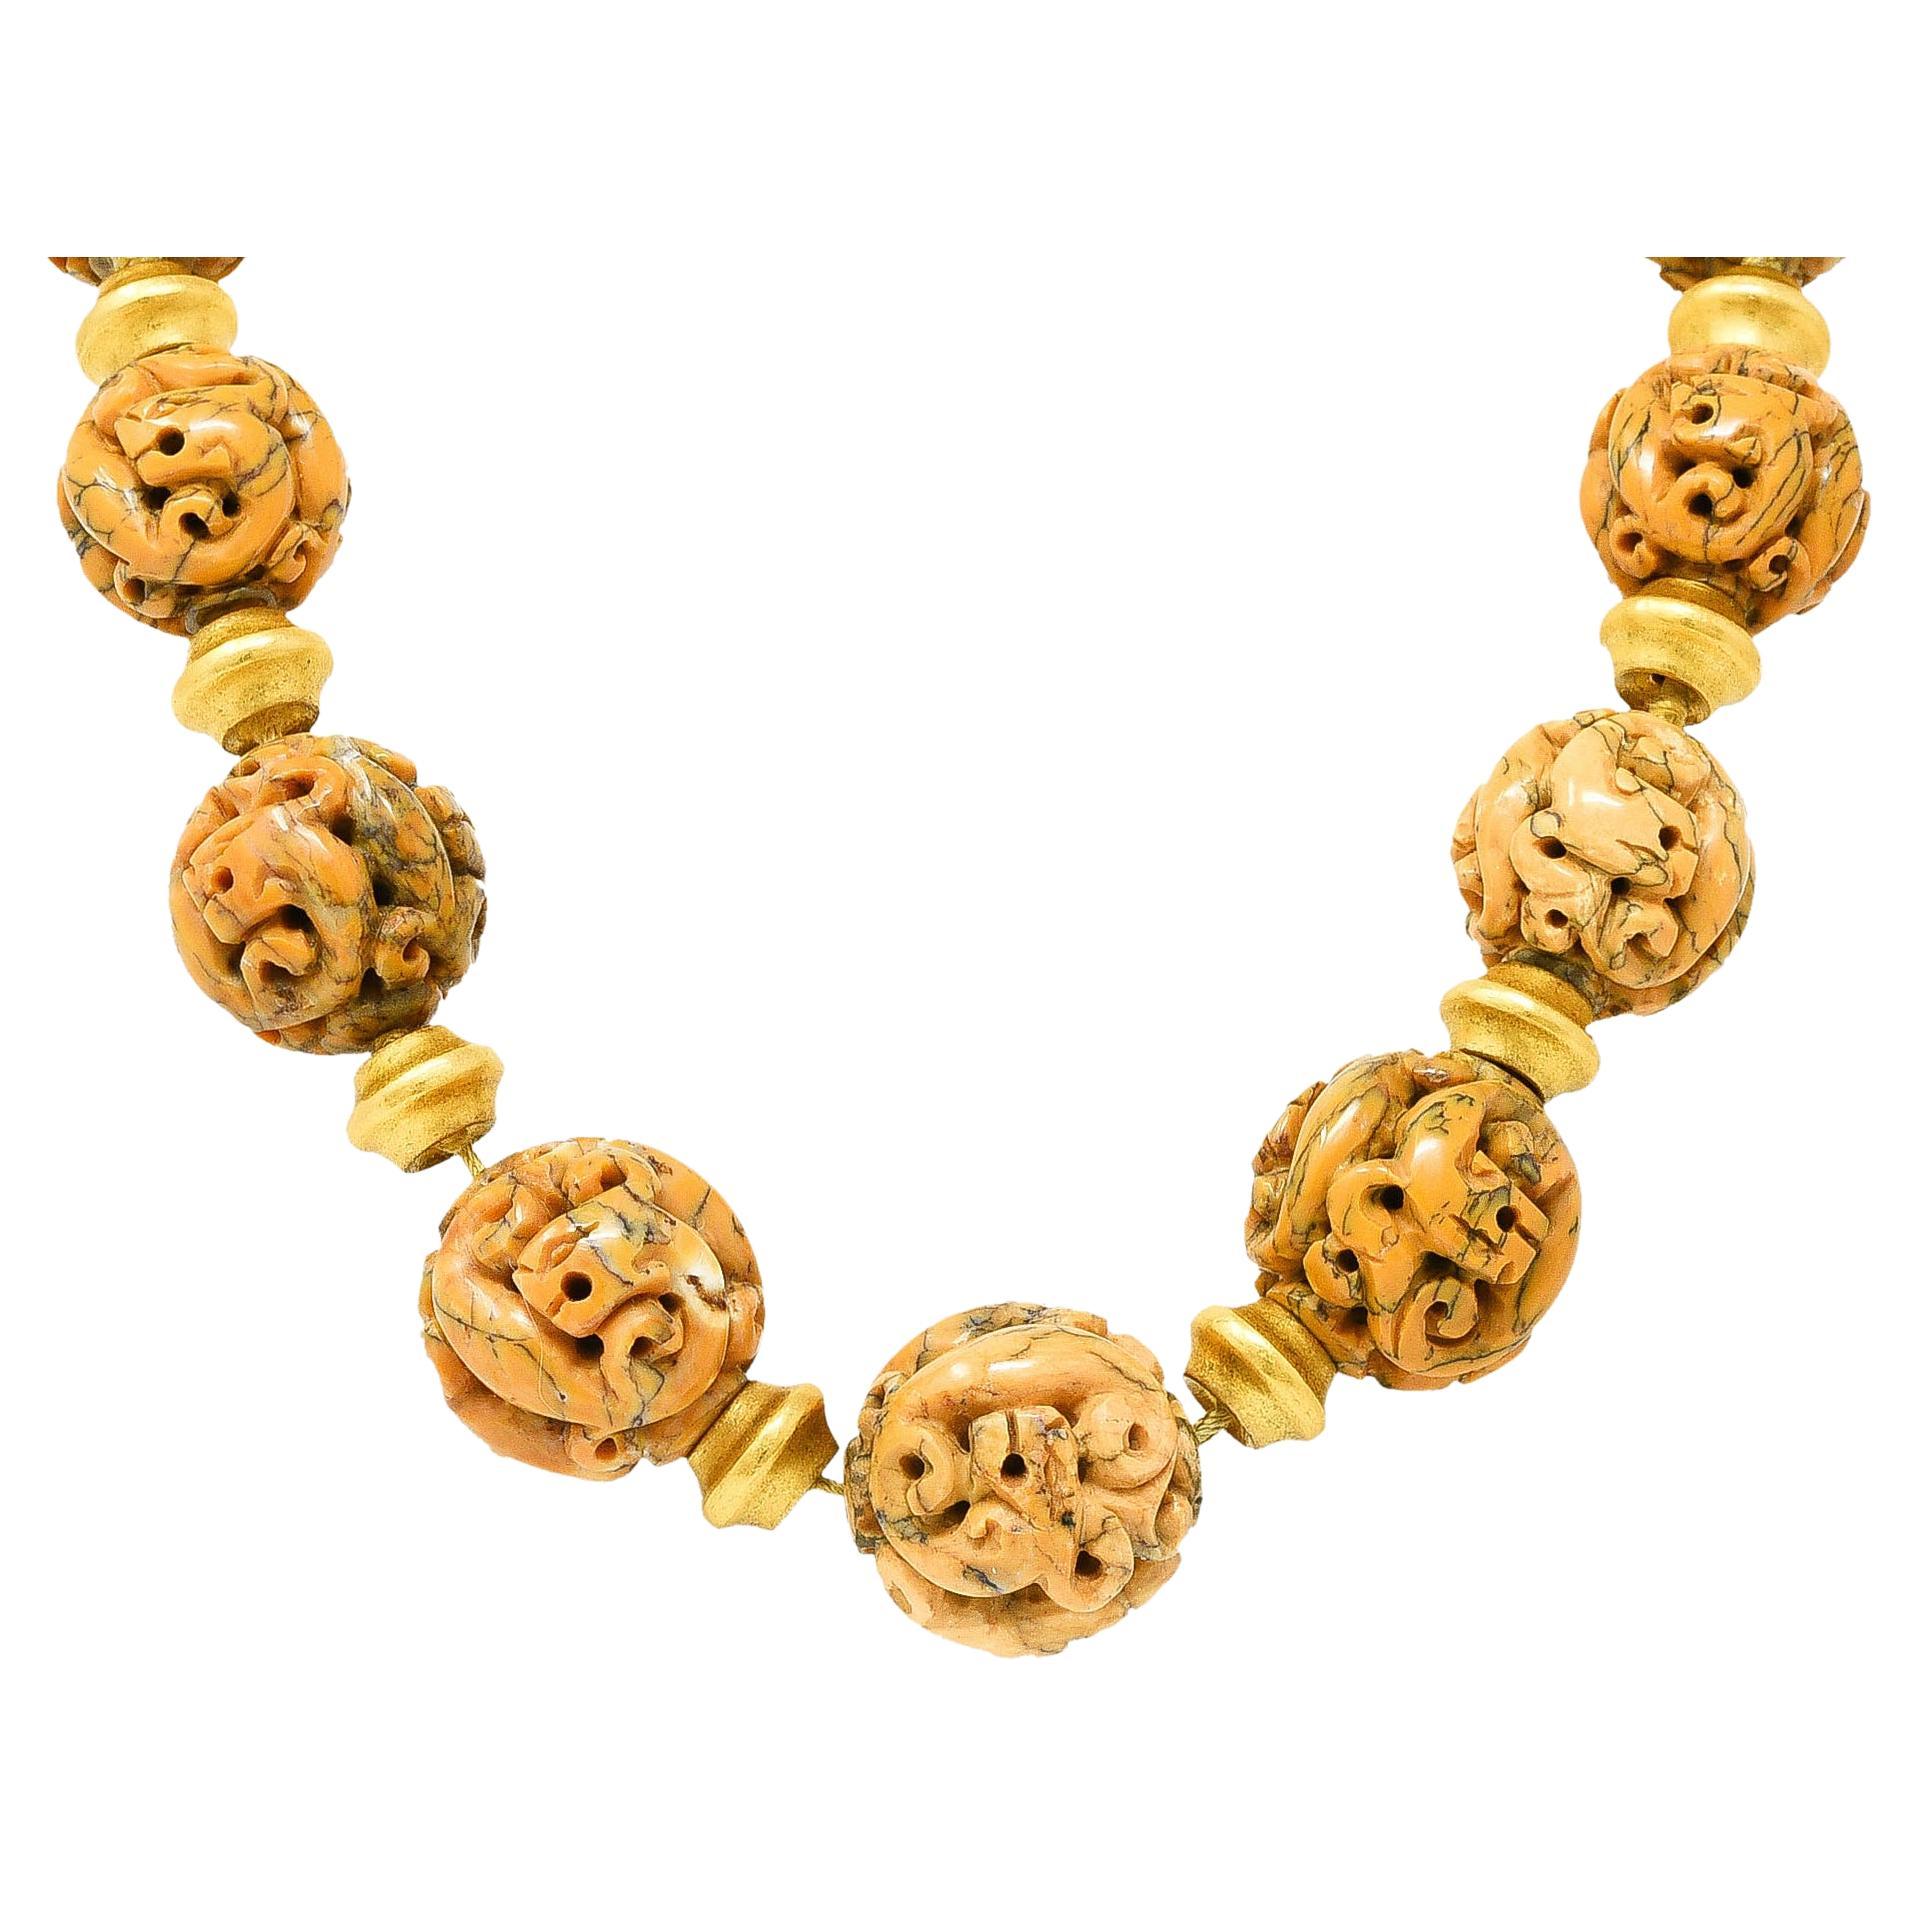 Necklace is comprised of round jasper beads carved to depict animal-like figures and graduating in size from 20.0 to 25.0 mm. Opaque orangey peach in color with white swirling and brownish black veining. Alternating with fluted gold spacer beads -